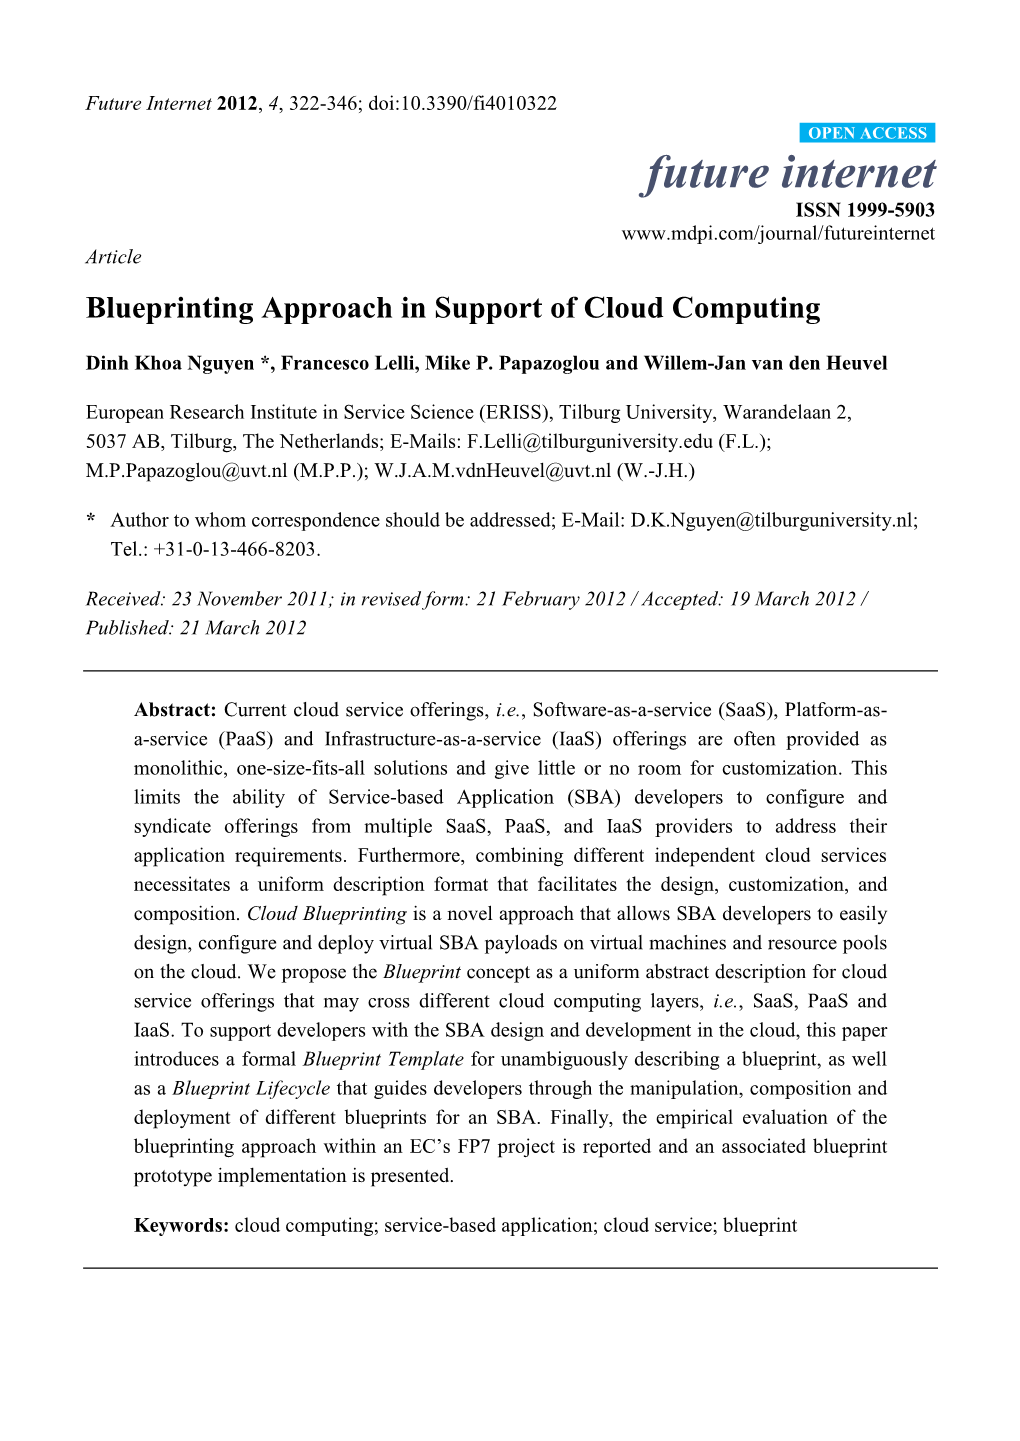 Blueprinting Approach in Support of Cloud Computing